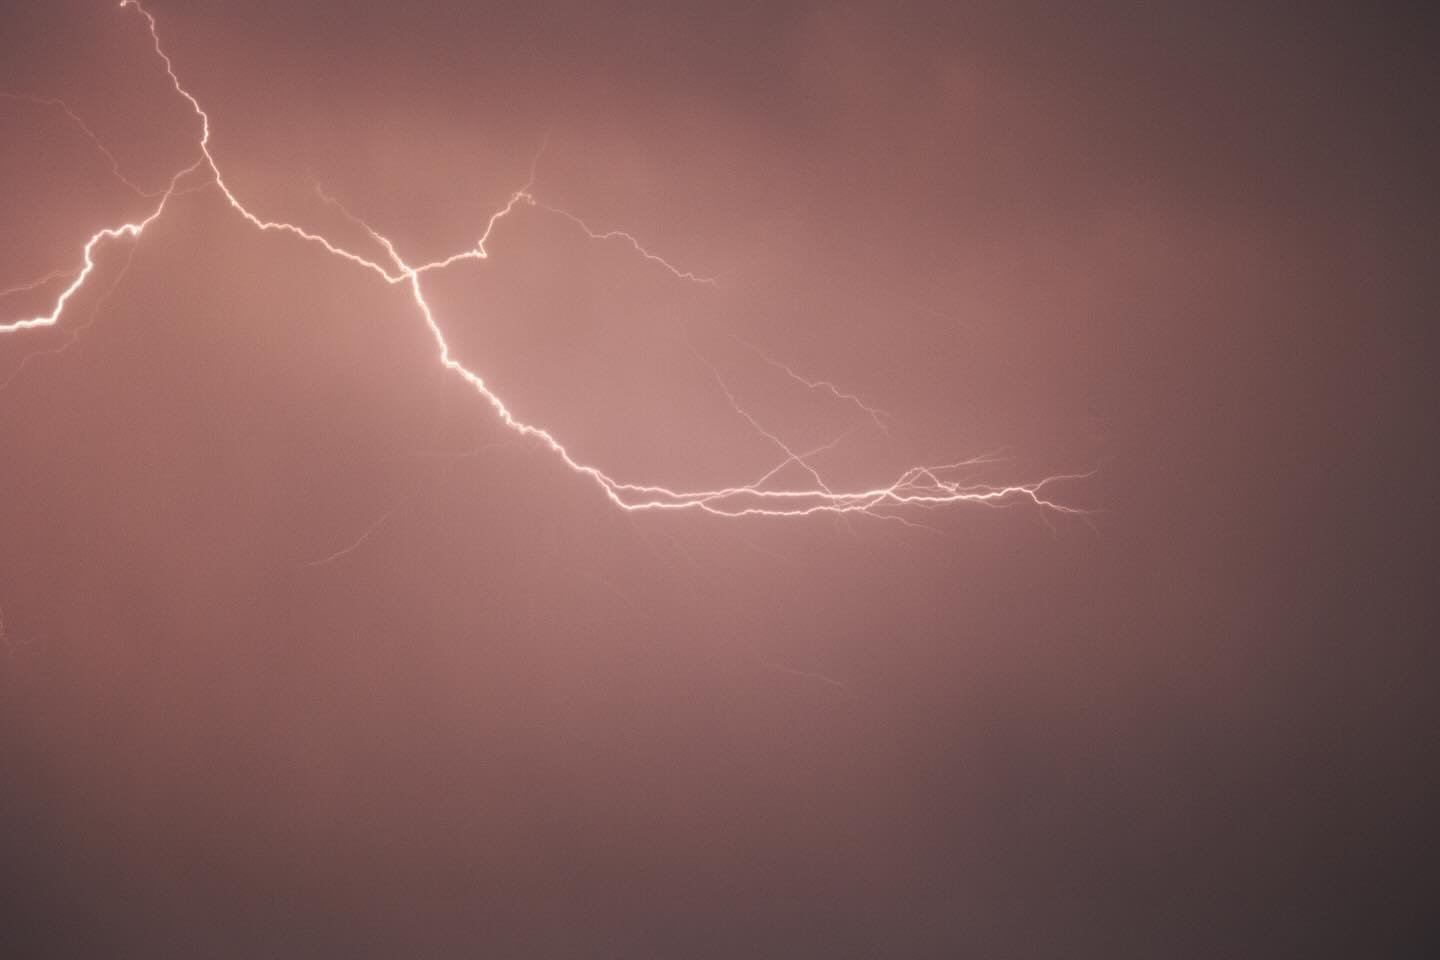 Reflections and Refractions 

Exploring the reflection and refraction of infrared light in thunderstorms. Cloud-to-cloud lightning is the spectacular display of electrical activity between thunderclouds. The bursts of electrical energy paint the sky 